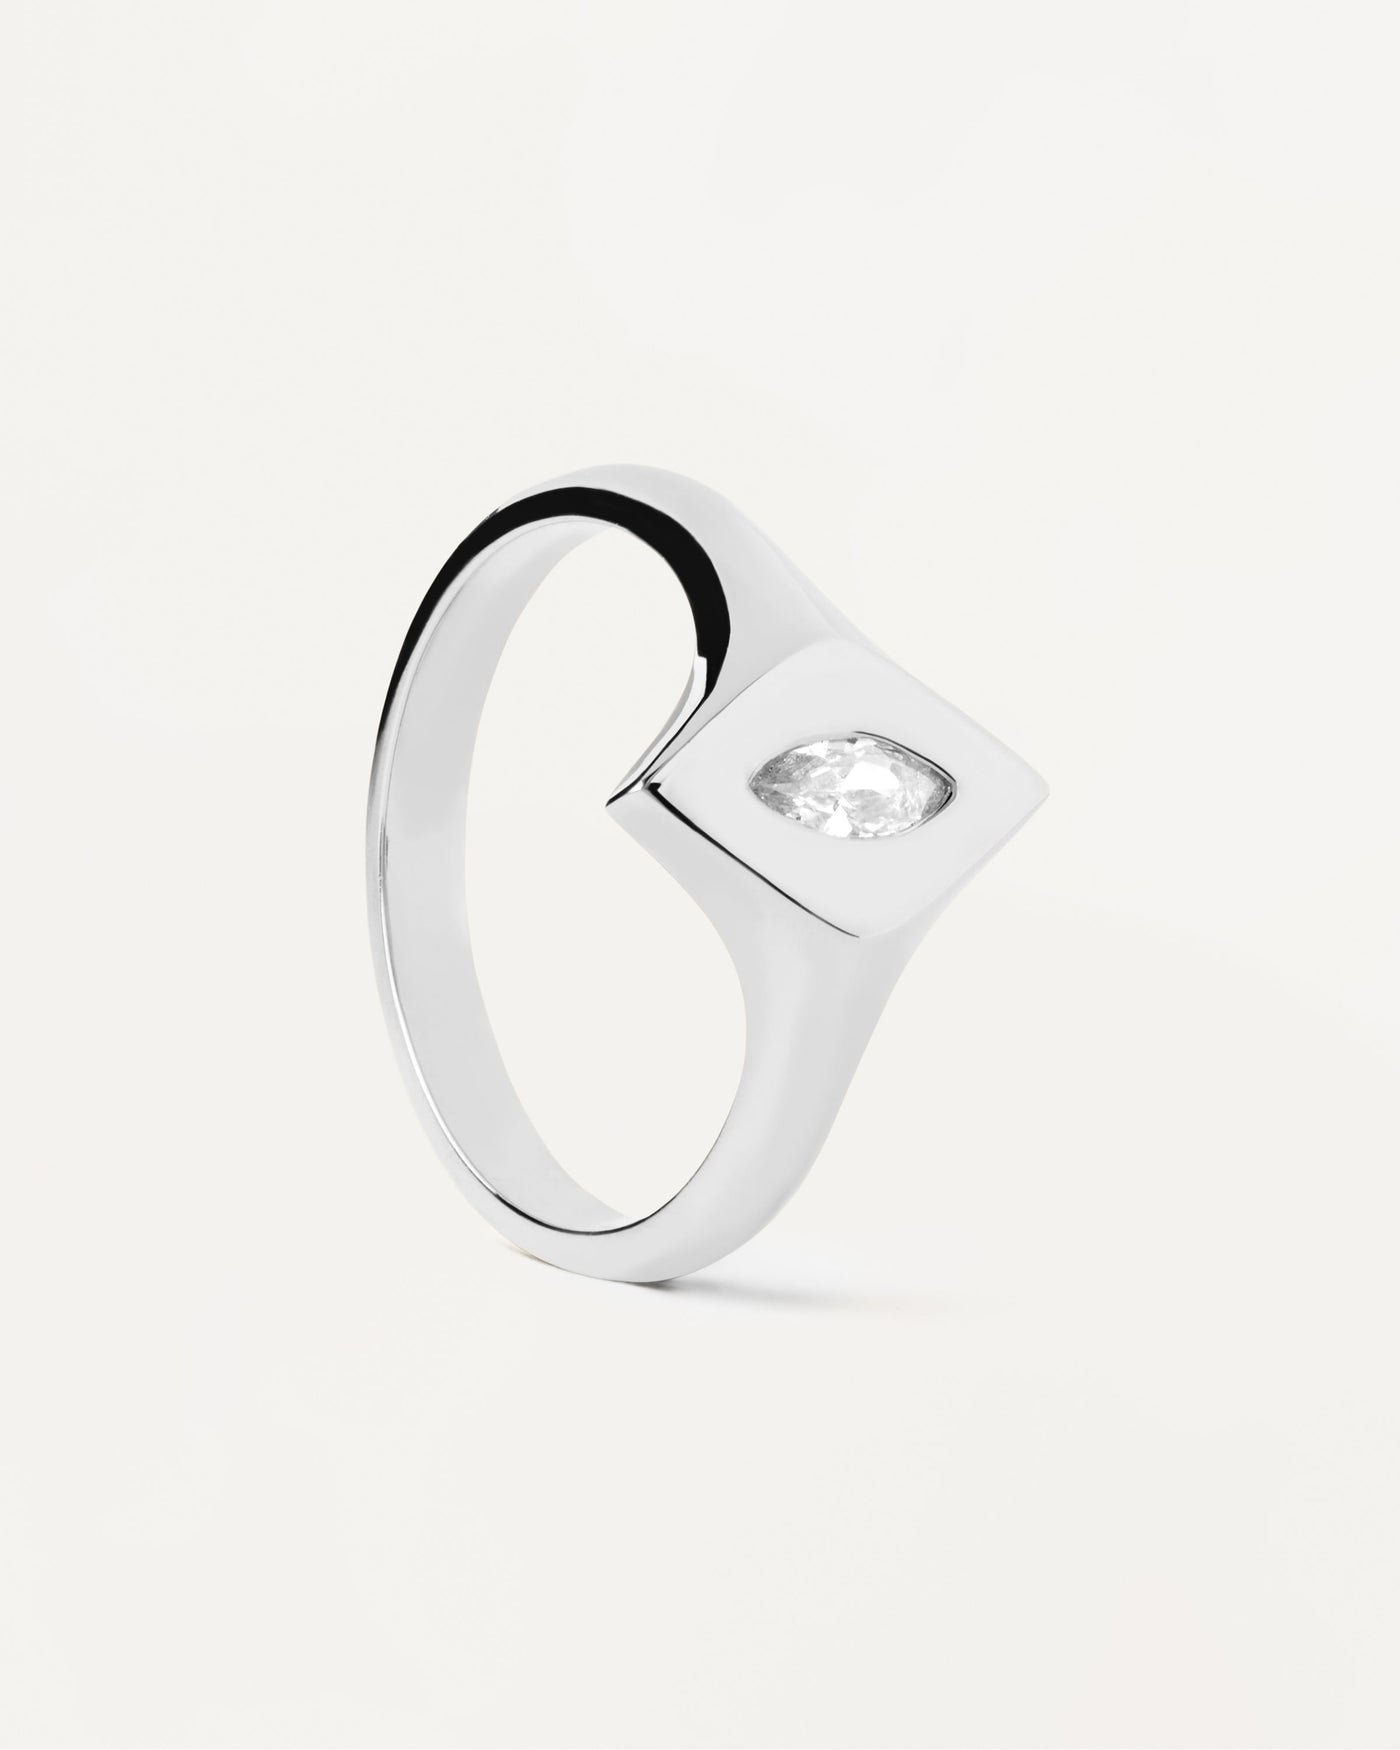 2023 Selection | Kate Stamp Silver Ring. Sterling silver rhombus signet ring with oval white zirconia. Get the latest arrival from PDPAOLA. Place your order safely and get this Best Seller. Free Shipping.